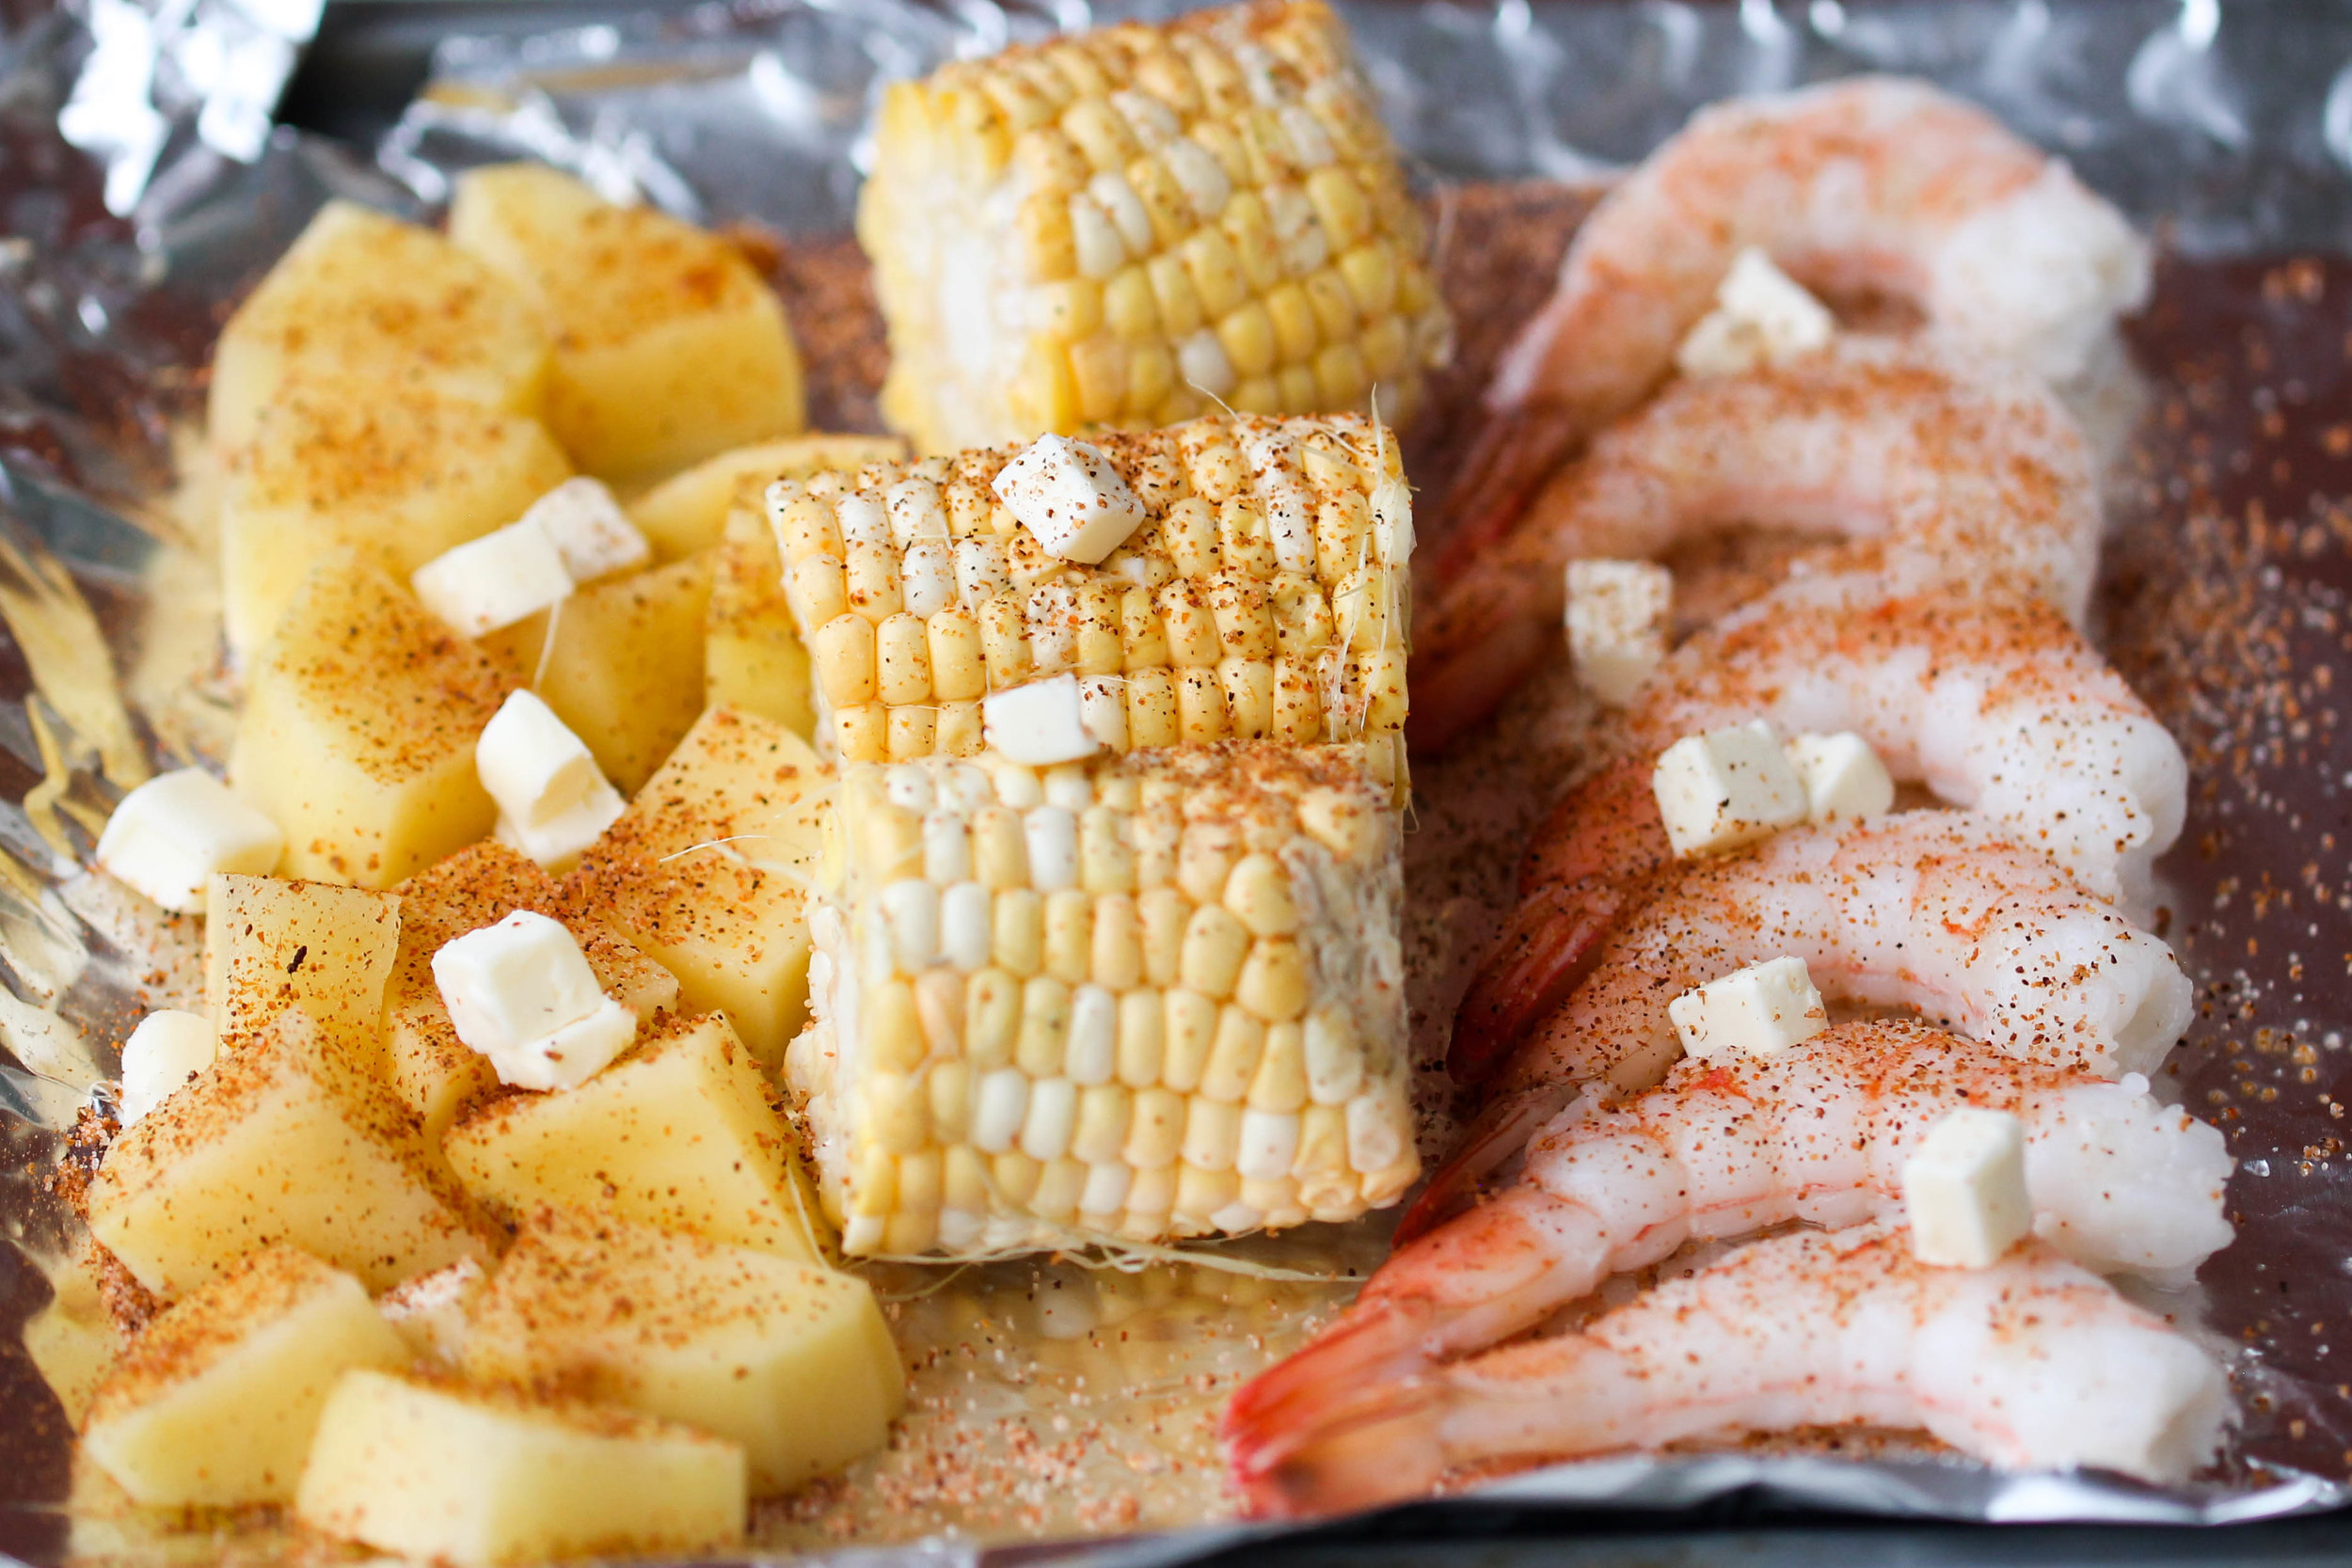 Oven baked Shrimp Boil is an easy dinner-friendly dish that can be enjoyed within less than an hour! Requires very little preparation, few ingredients, and pretty much no clean up.